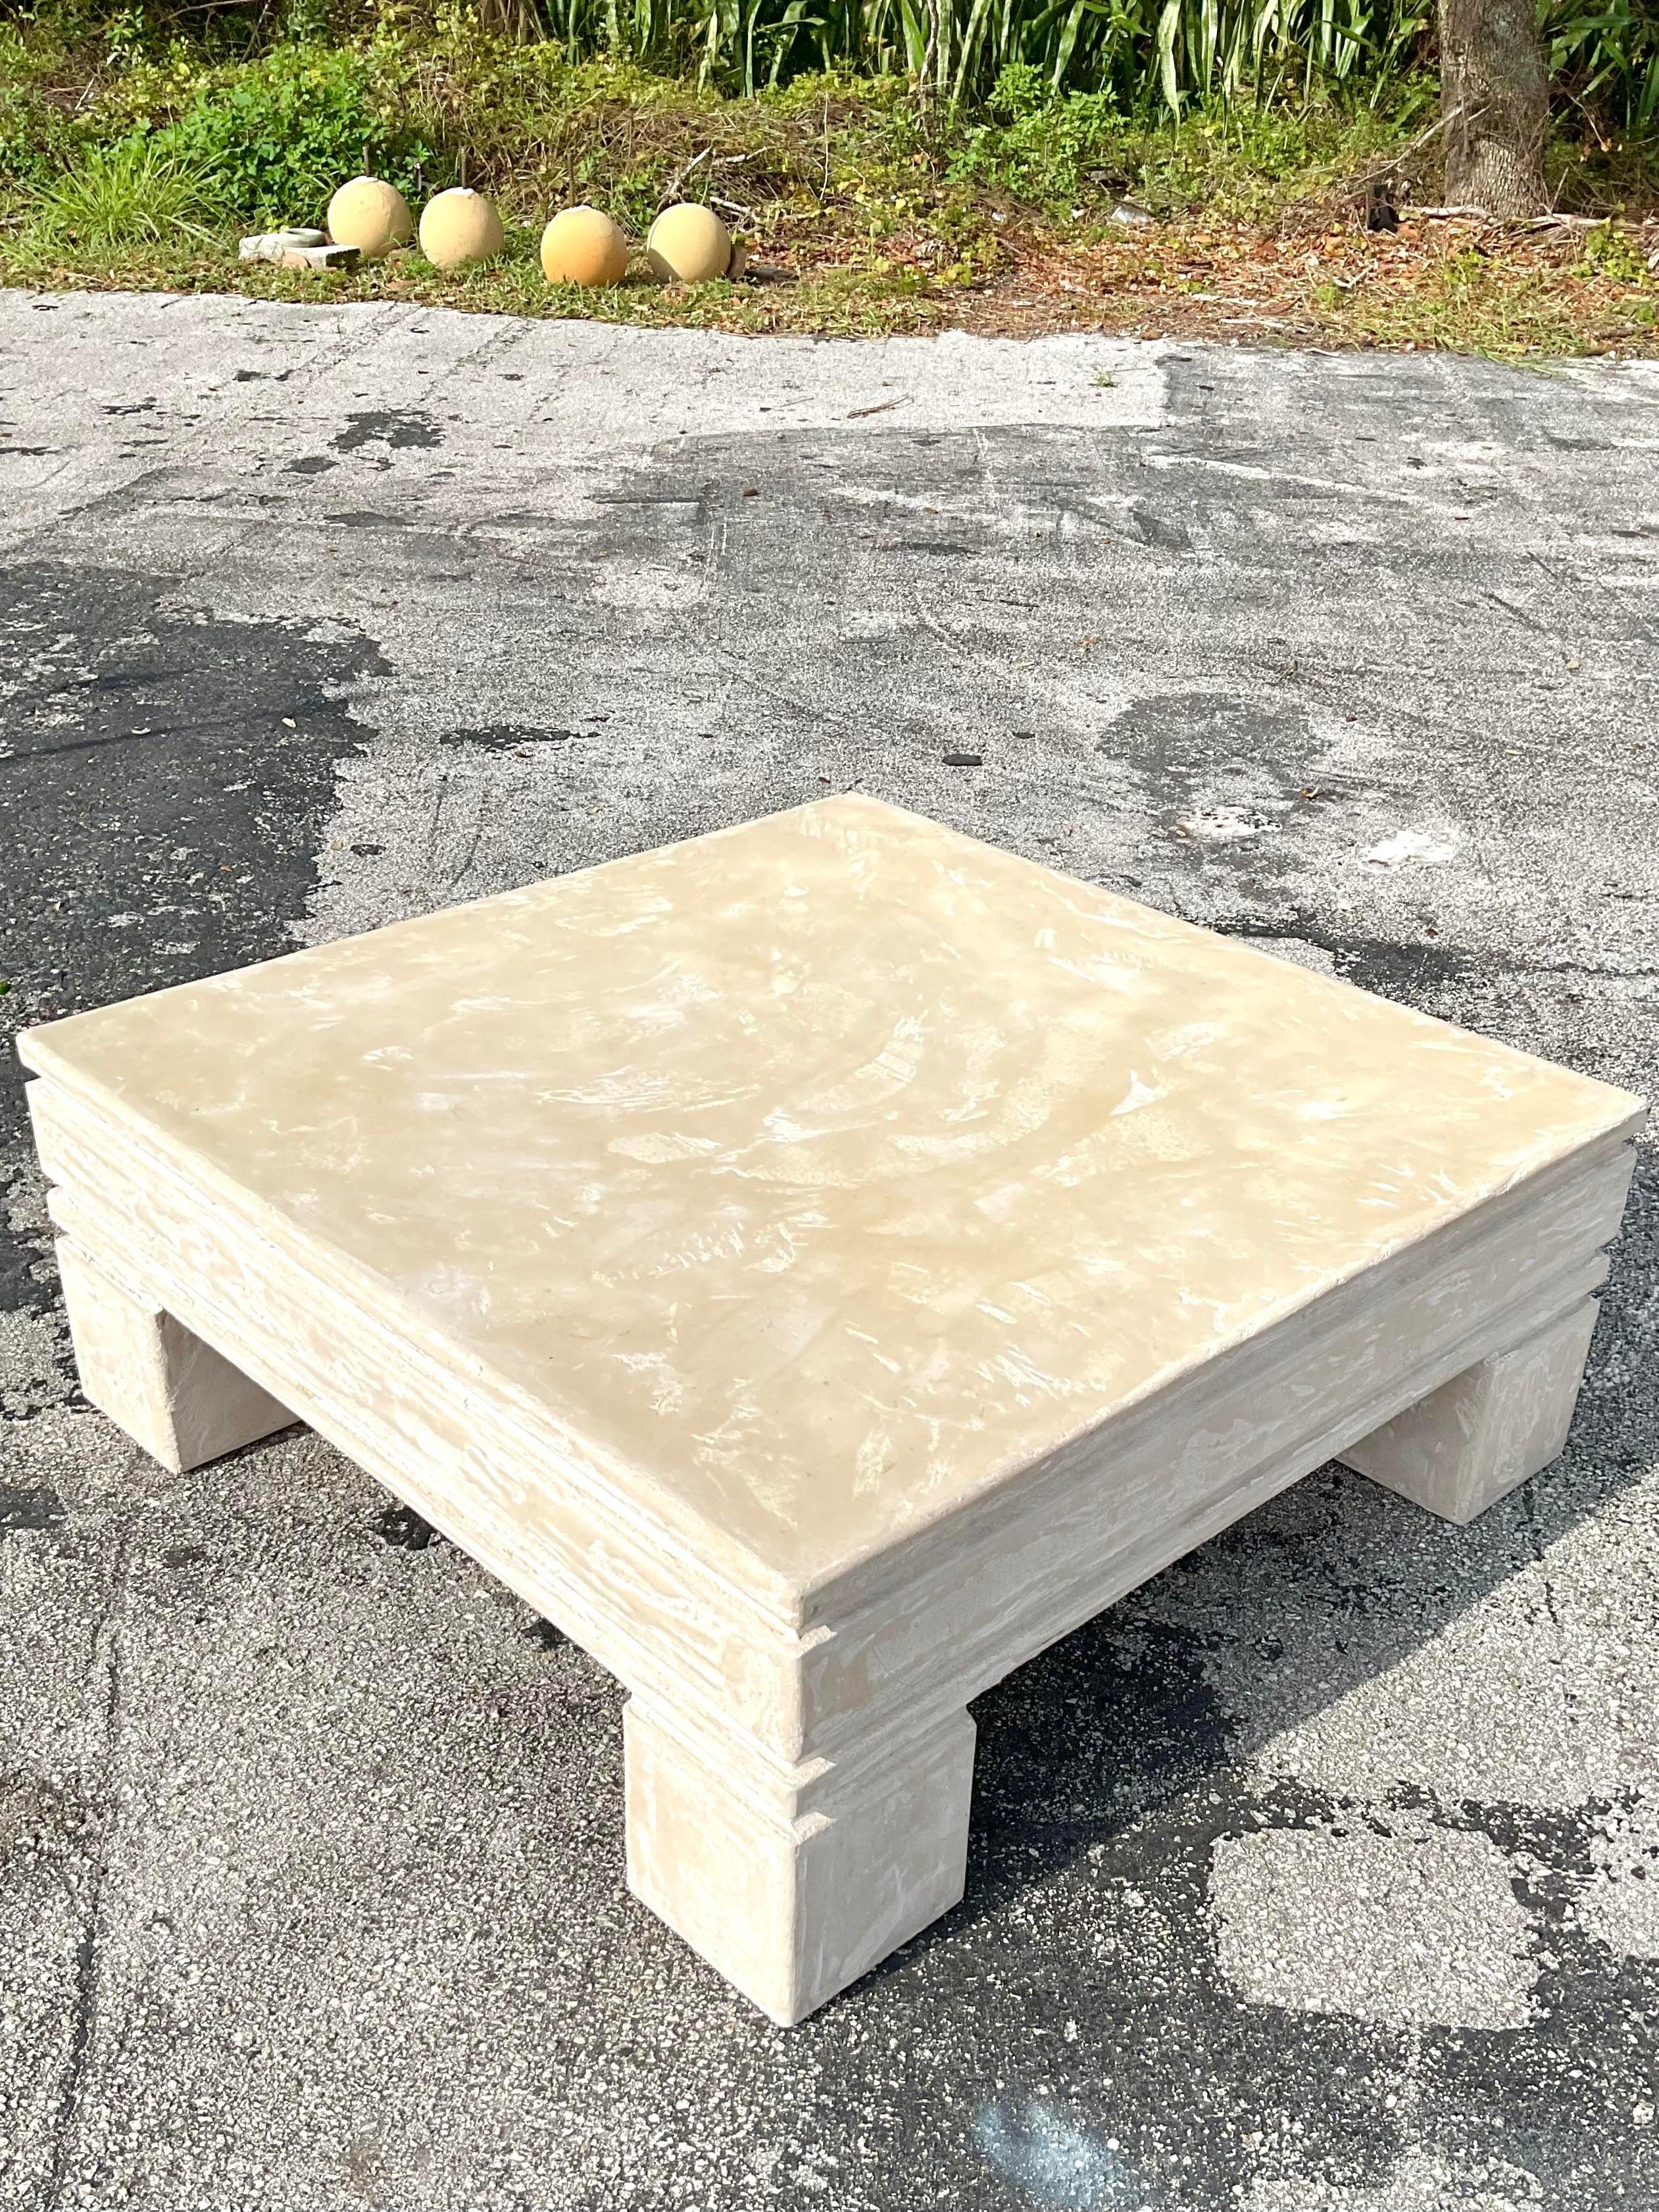 Art Deco Mid 20th Century Vintage Plaster Block Style Square Coffee Table For Sale